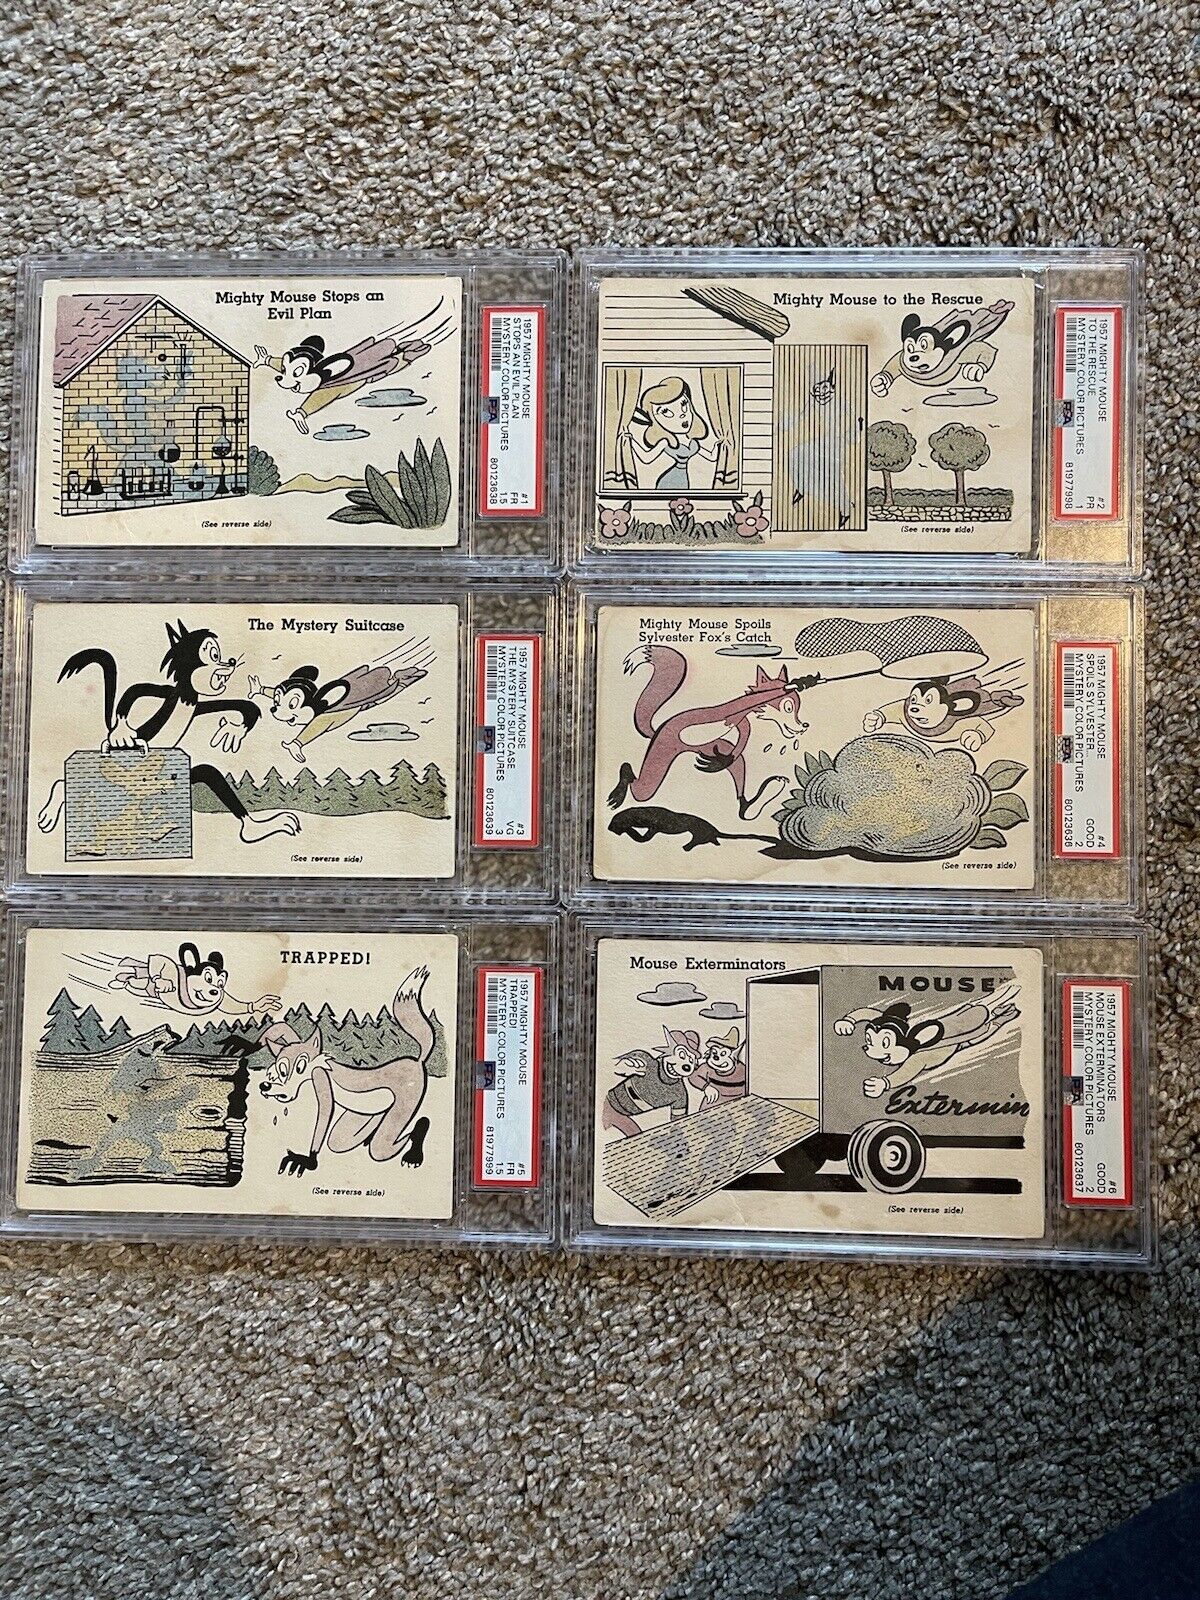 1957 Mighty Mouse Complete Set Psa